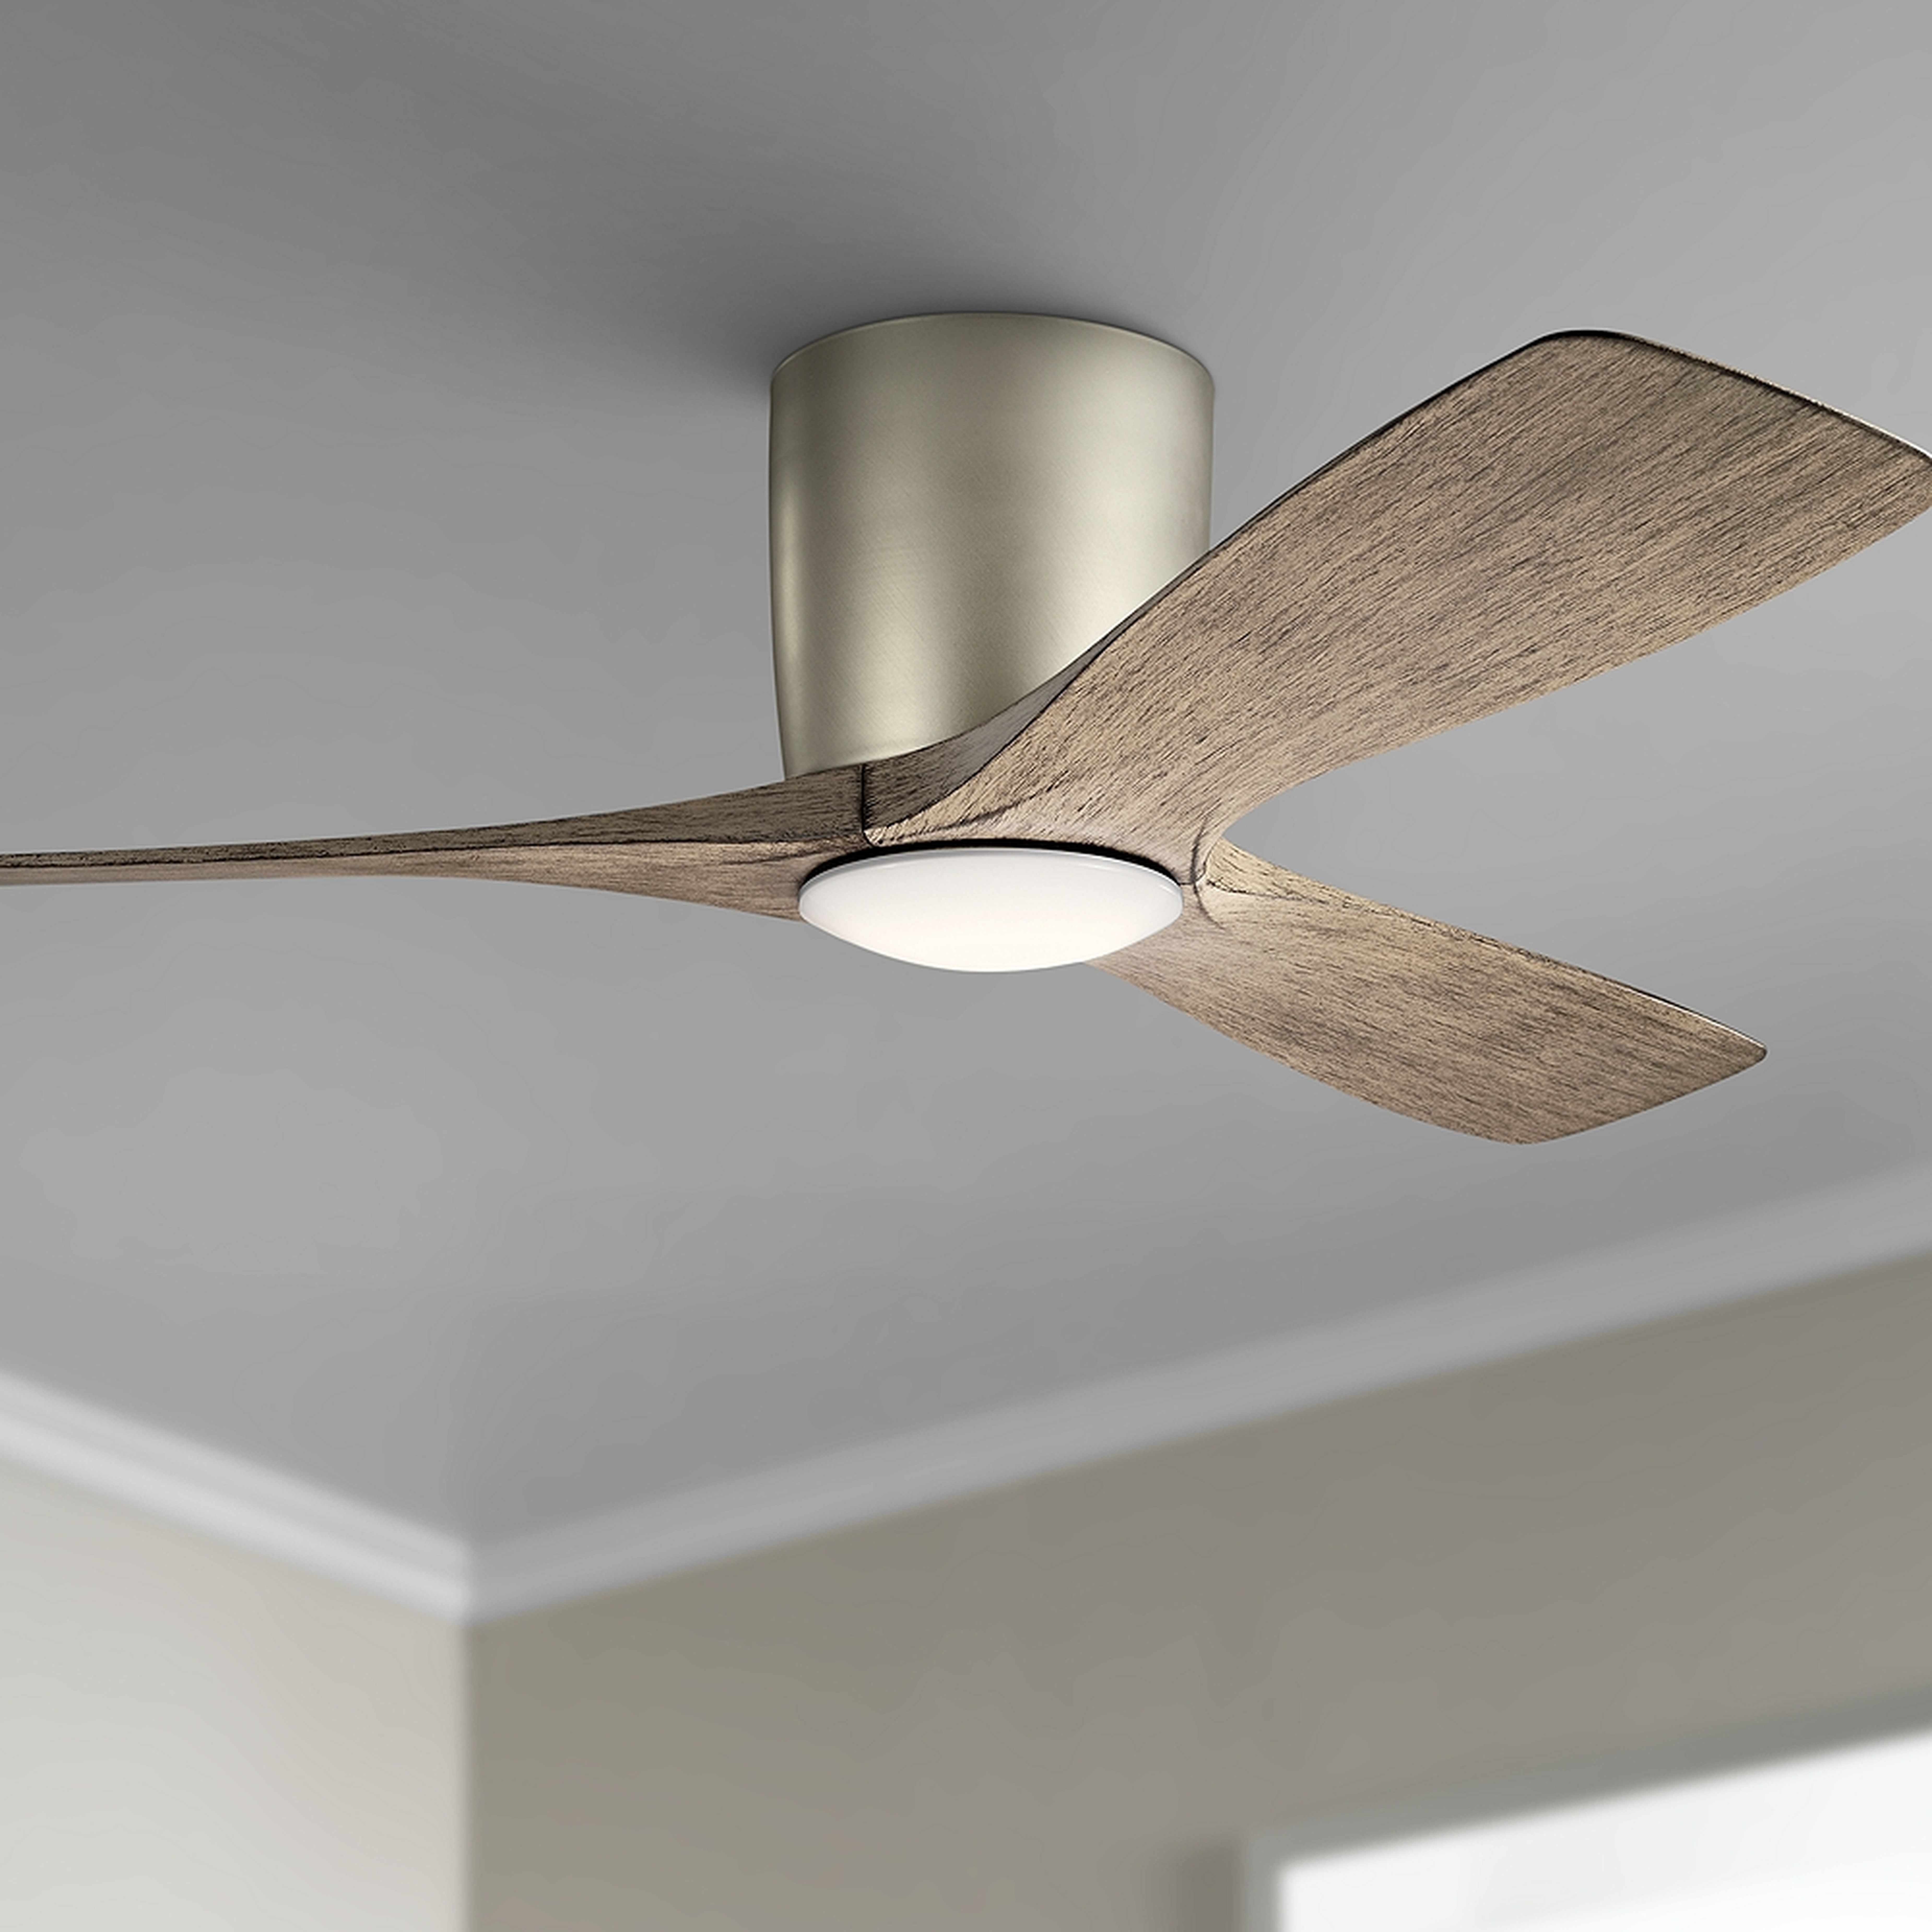 48" Kichler Volos Brushed Nickel Hugger LED Ceiling Fan - Style # 74A90 - Lamps Plus